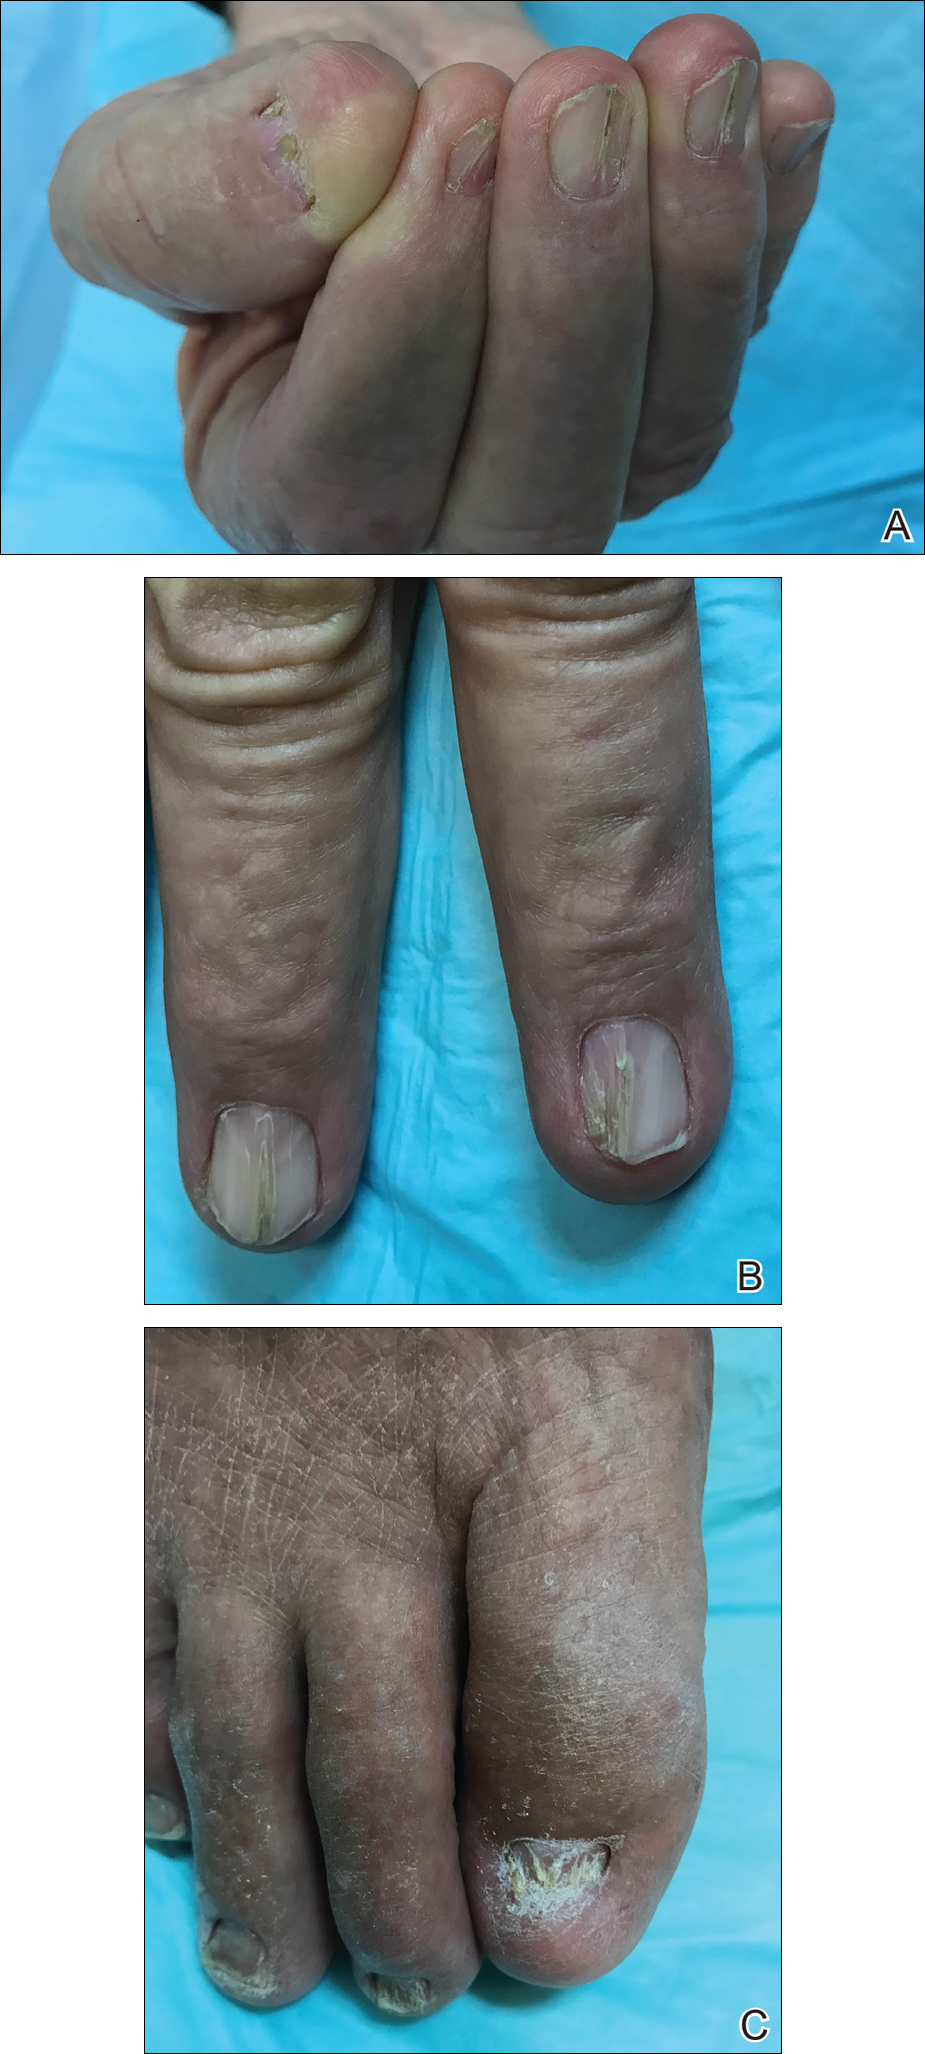 NAIL-PATELLA SYNDROME WITH NEPHROTIC SYNDROME AND DEAFNESS: A CASE REPORT |  Semantic Scholar